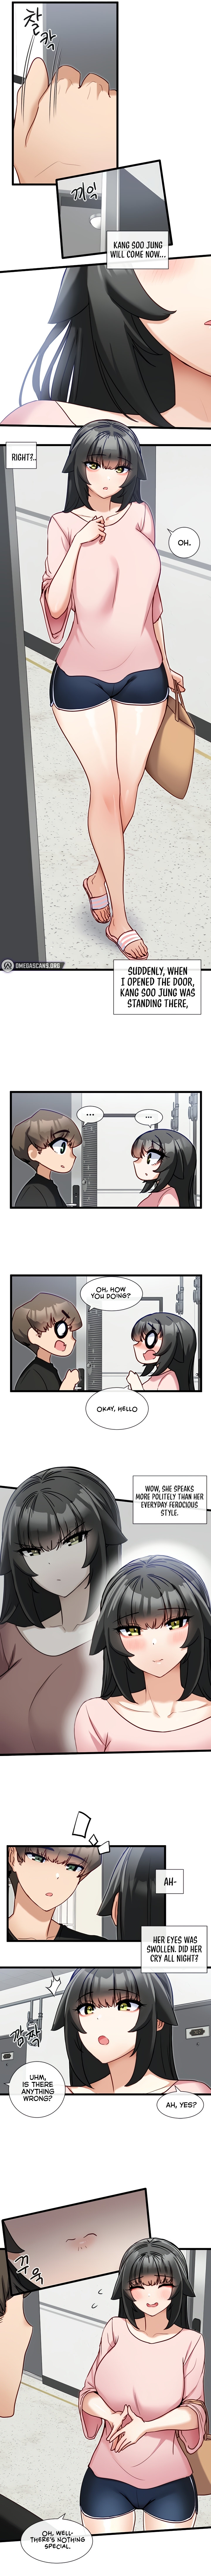 Heroine App - Chapter 13 Page 7